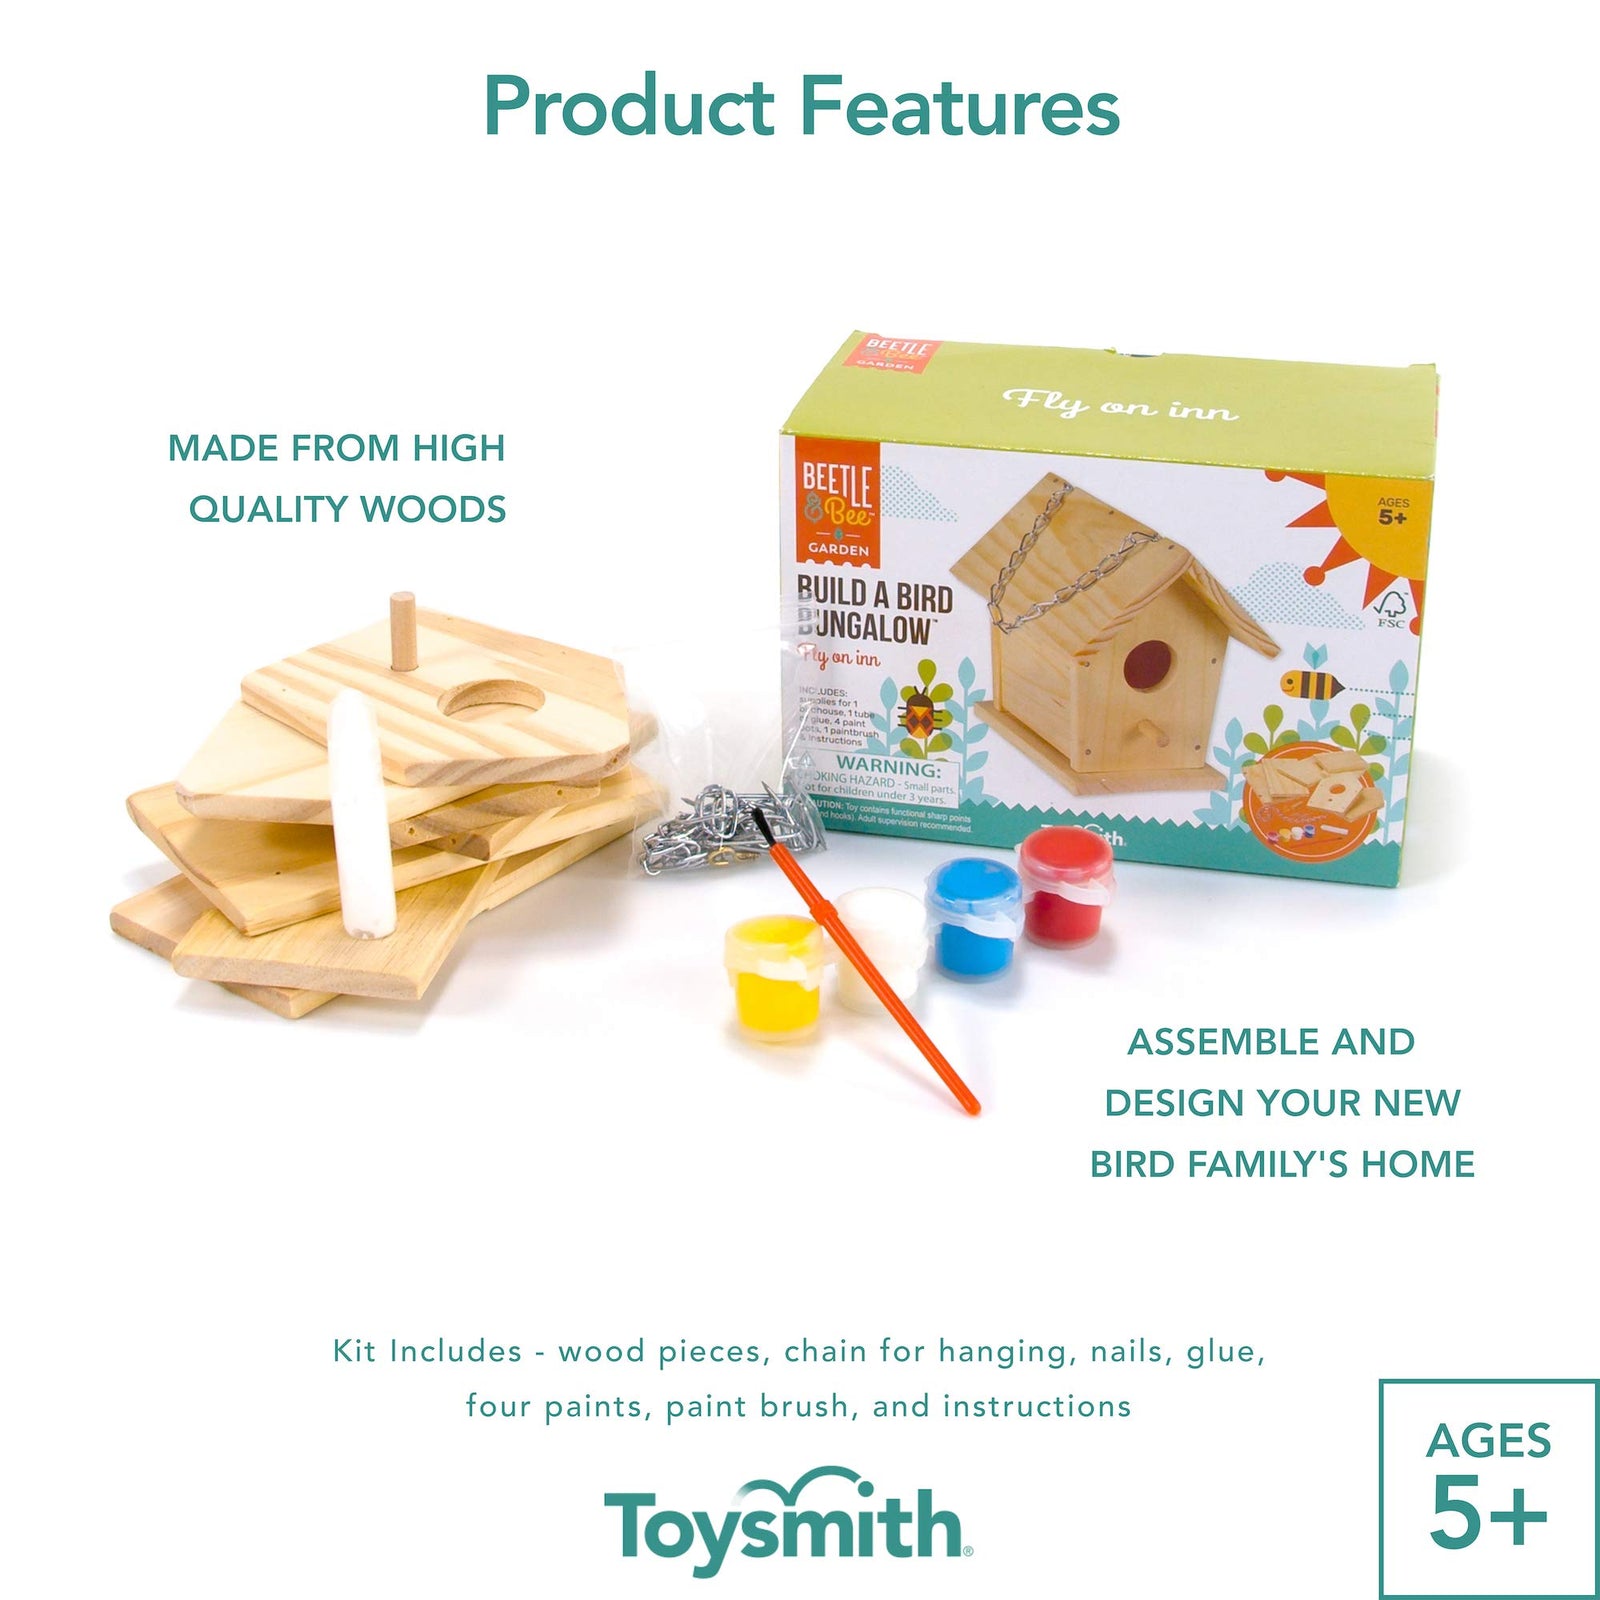 Toysmith Beetle & Bee Build A Bird Bungalow - DIY Kid Art Craft Outdoor Birdhouse Kit, 6" x 4" x 6", Hardware & glue included- 4 Paints, 1 Brush, 7 Wooden Pcs, Chain for Tree Hanging, Age 5+